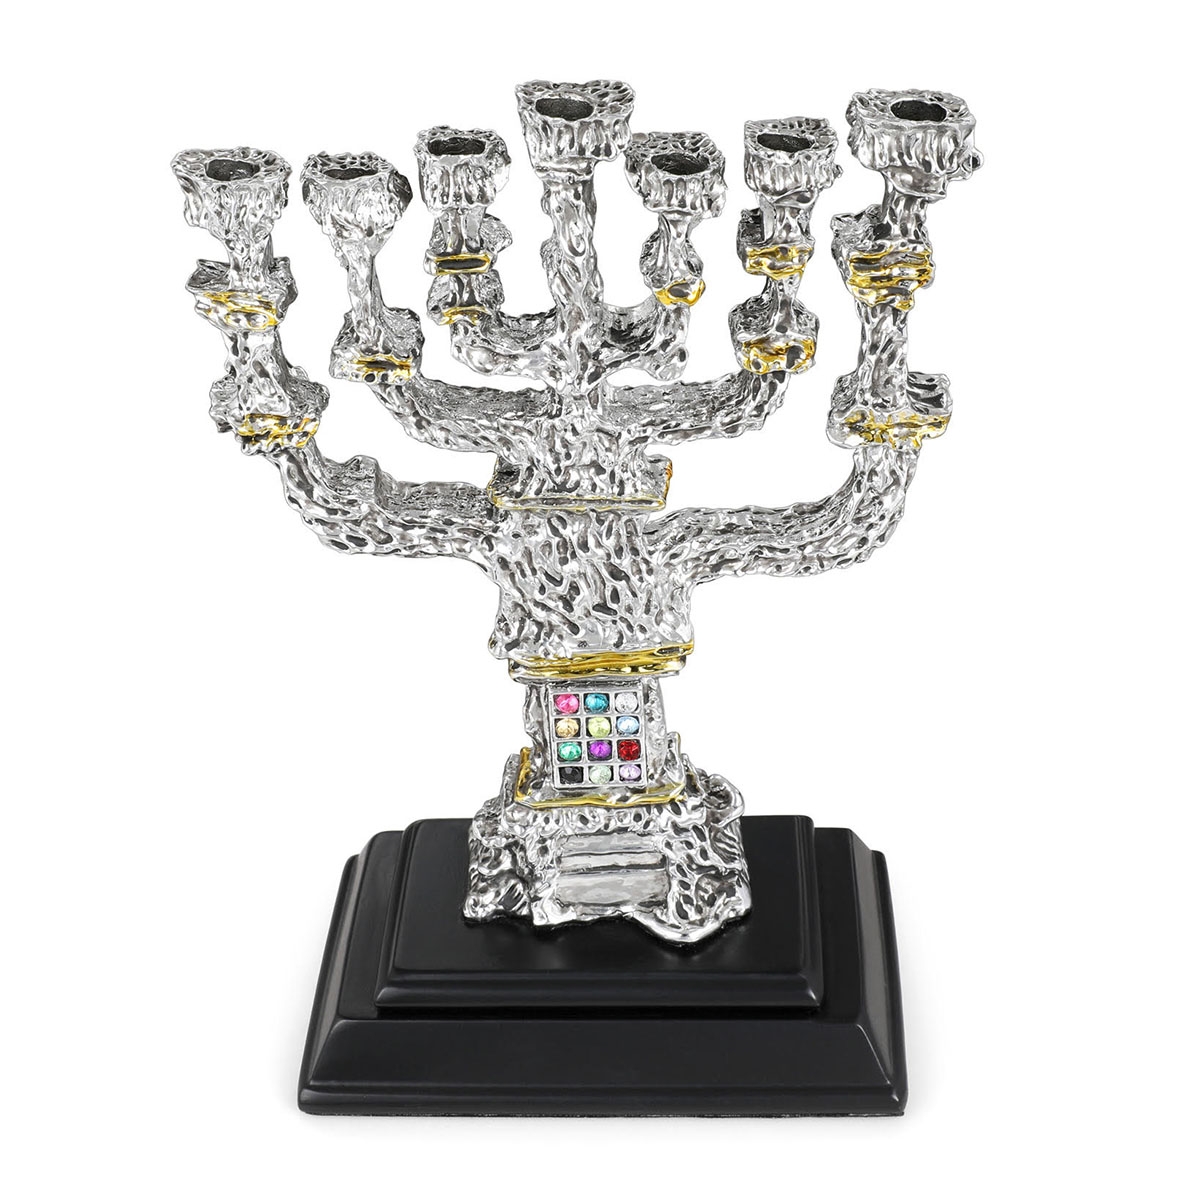 Silver-Plated and Gold-Accented Seven-Branched Menorah With Hoshen Design - 1